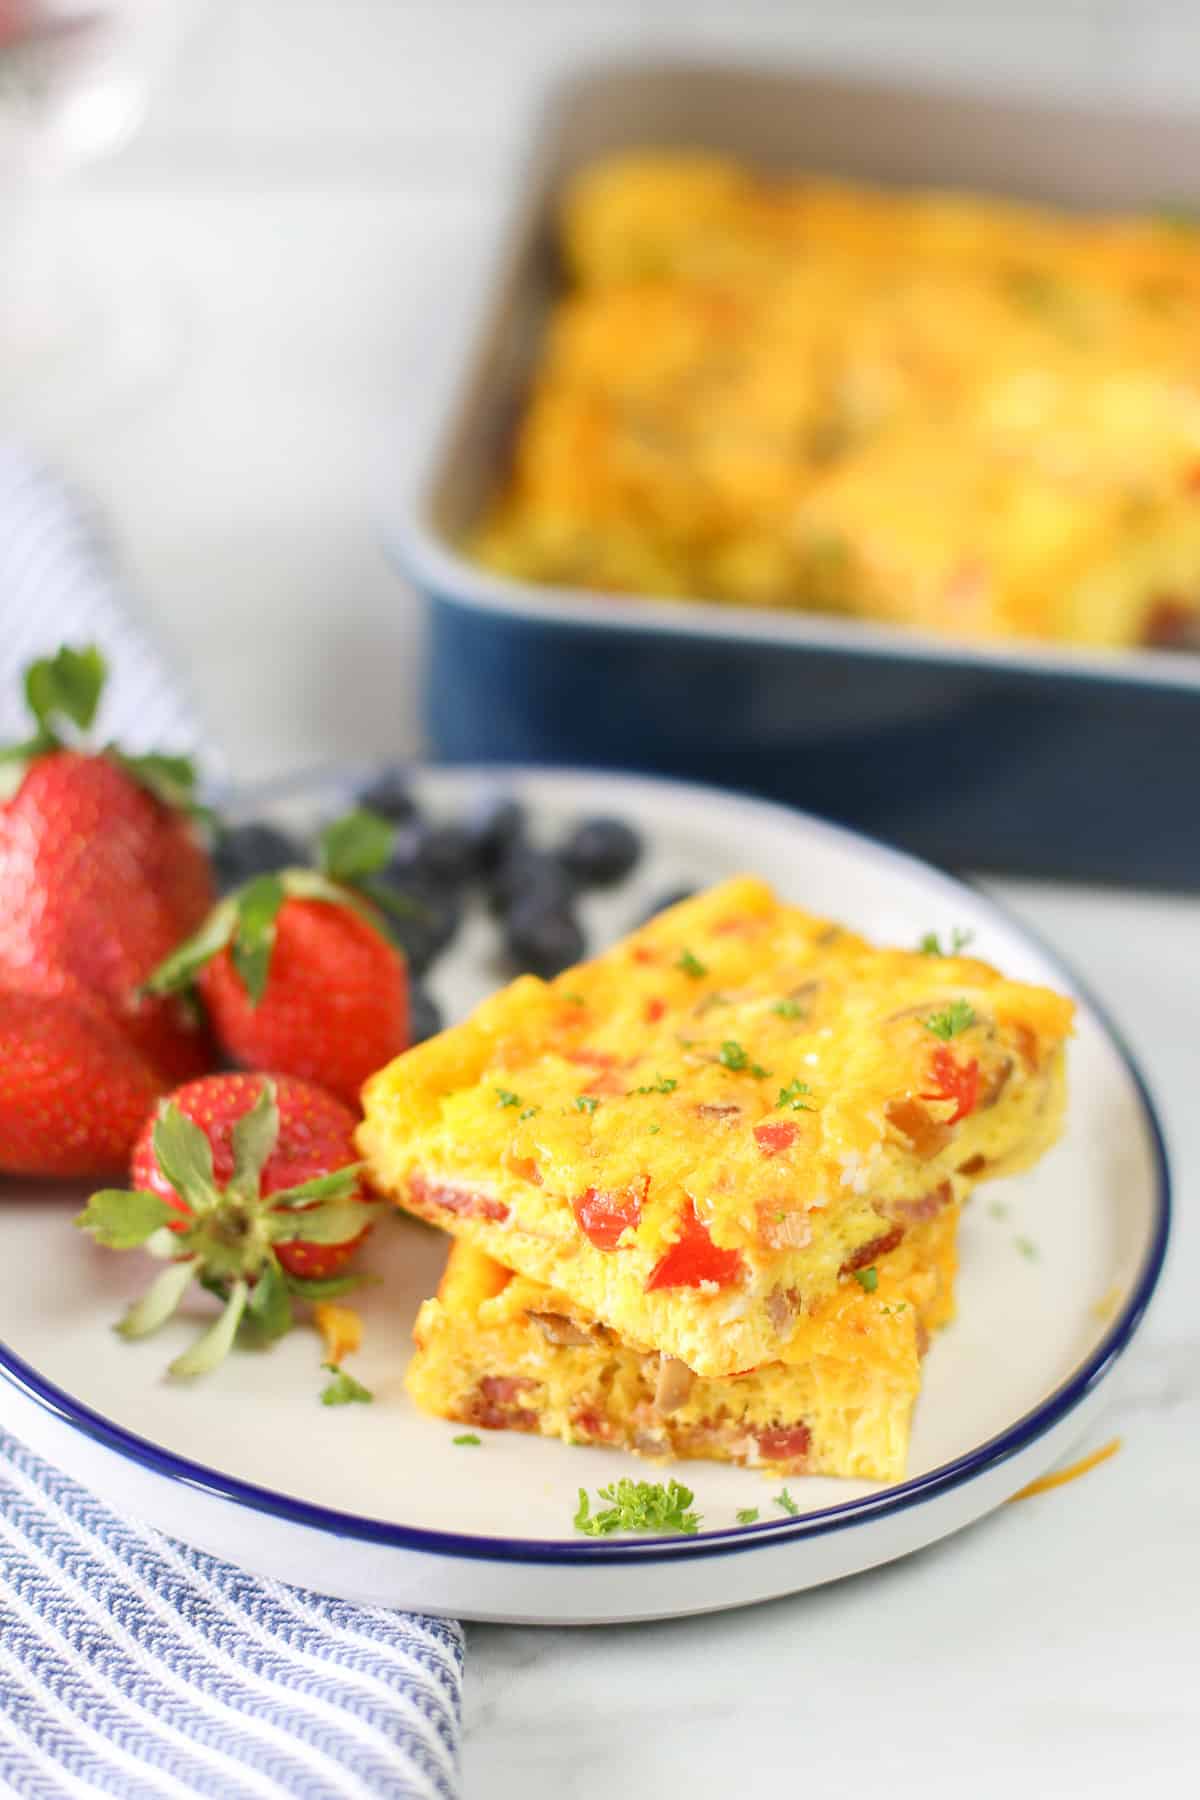 Baked omelette slices stacked on a plate with fruit.